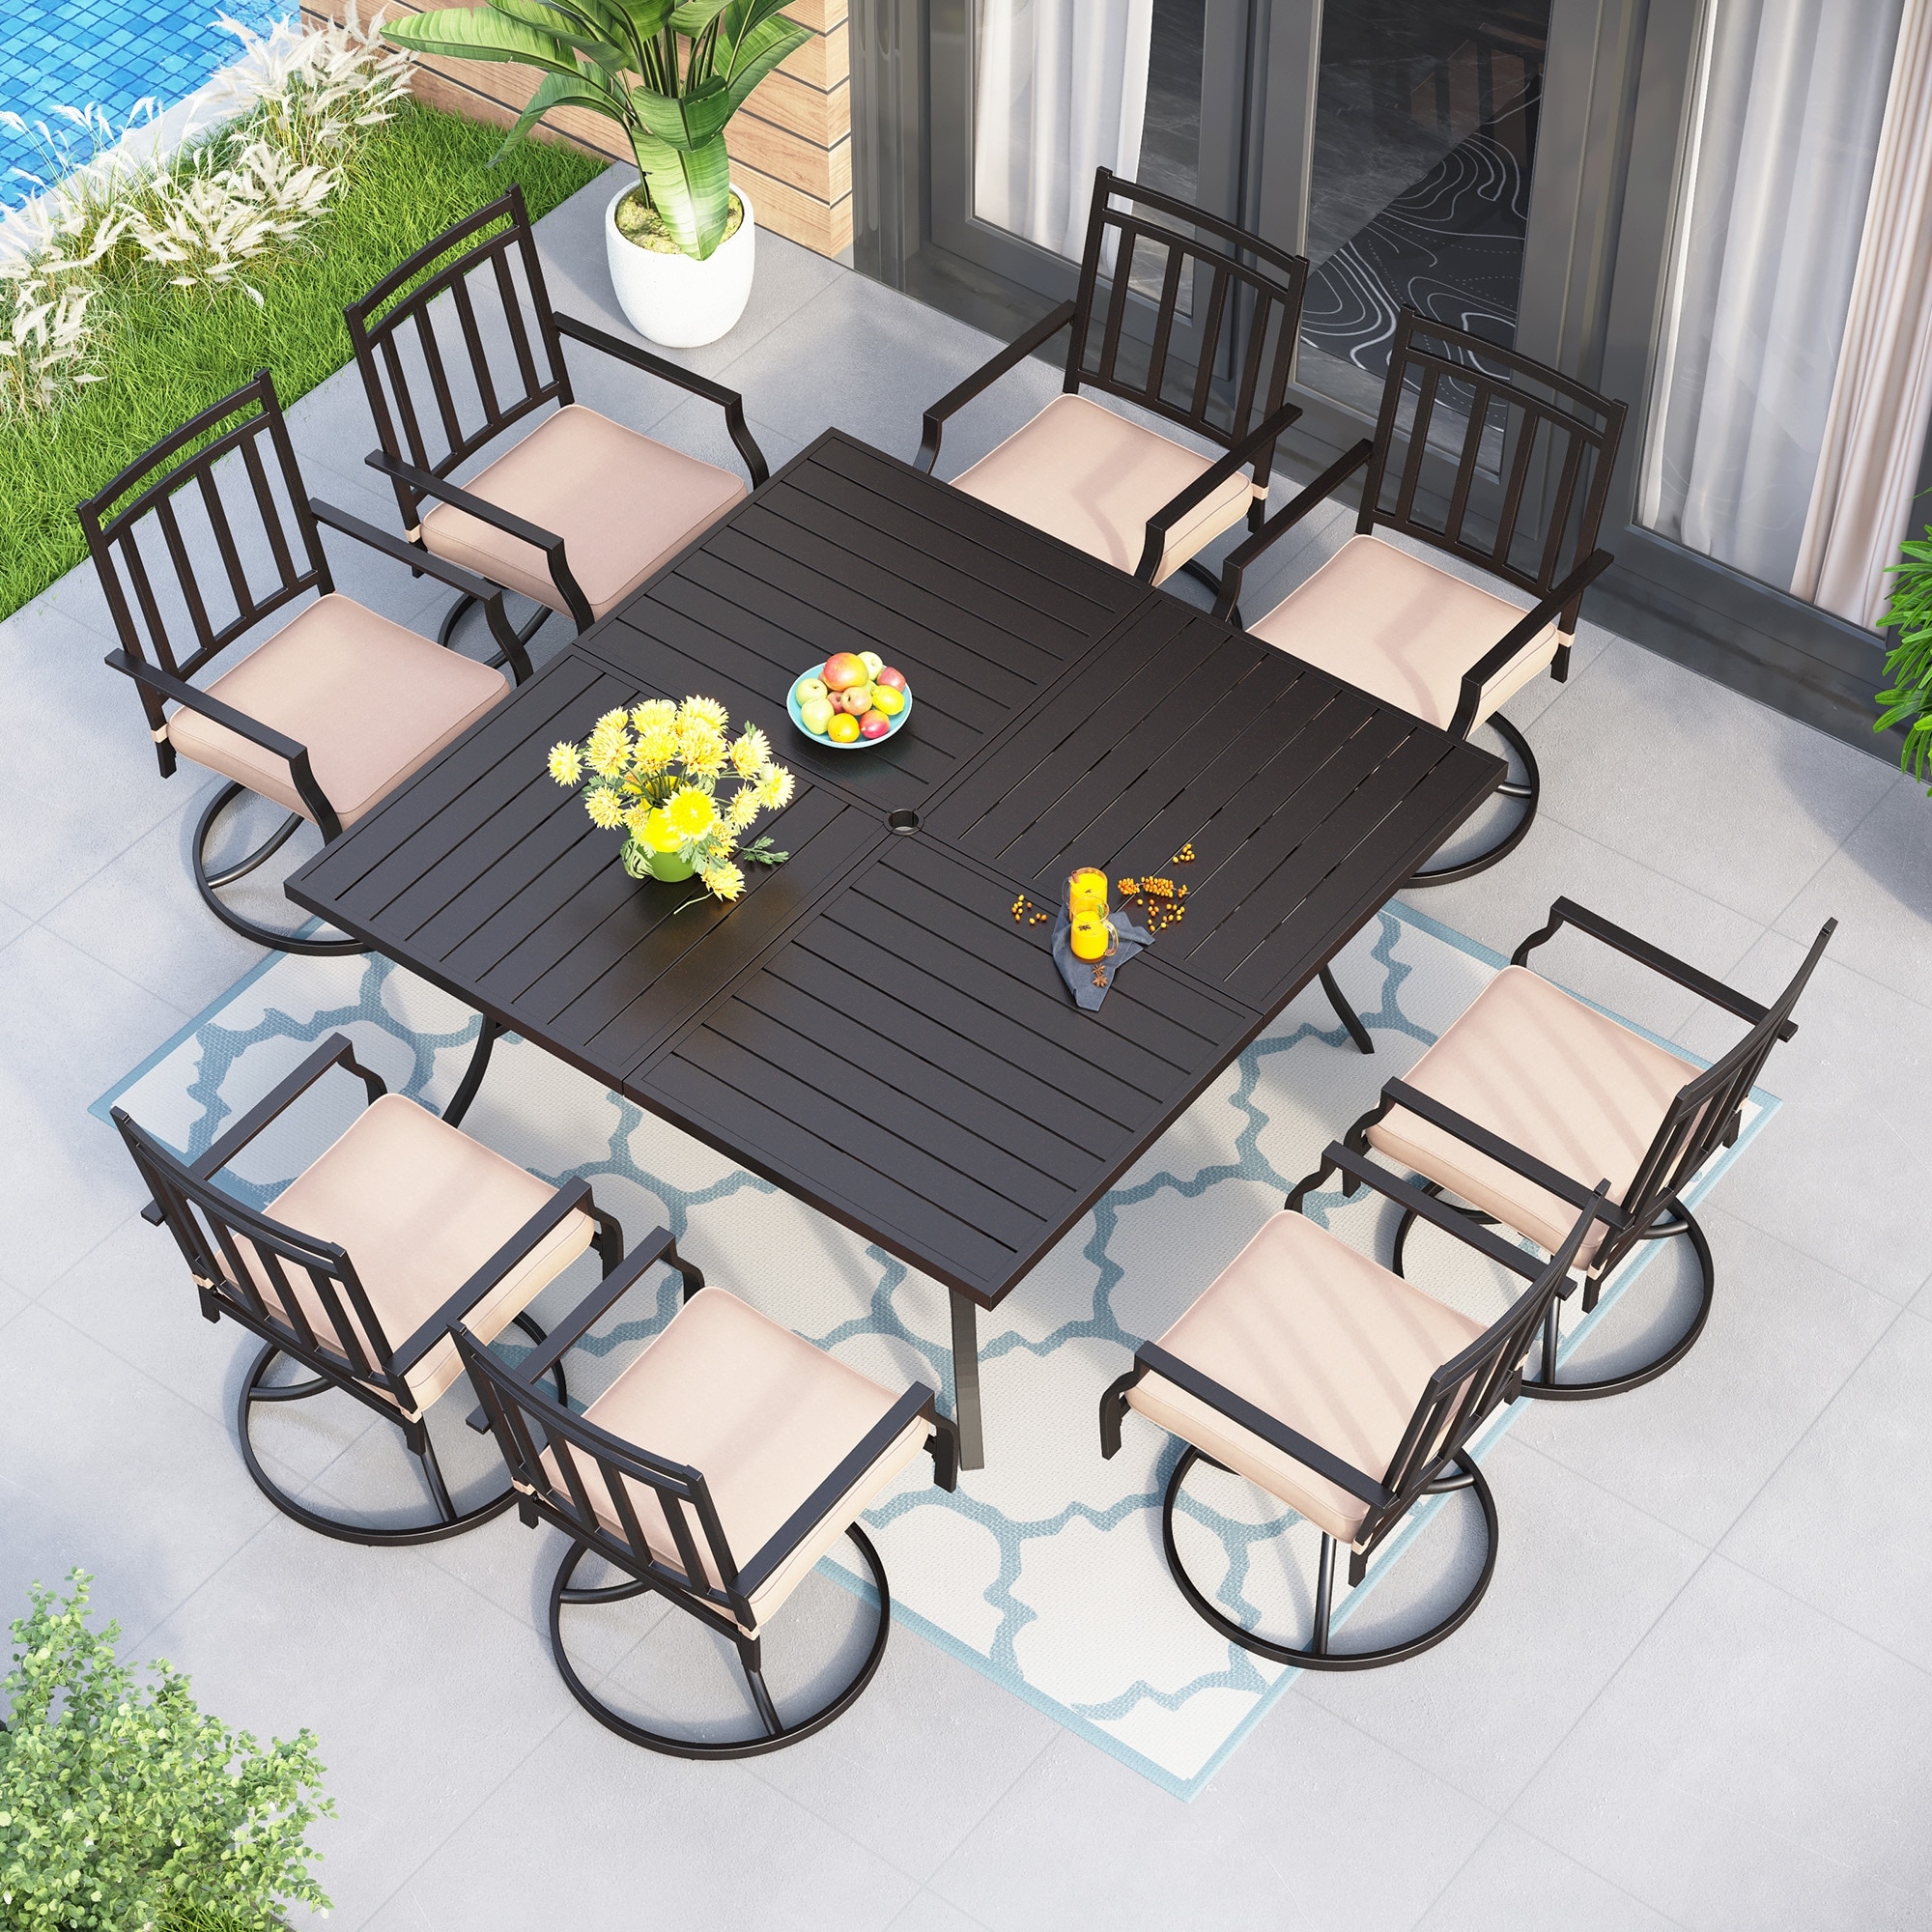 9-piece Patio Dining Set  60 Inch Square Metal Table And 8 Swivel Dining Chairs